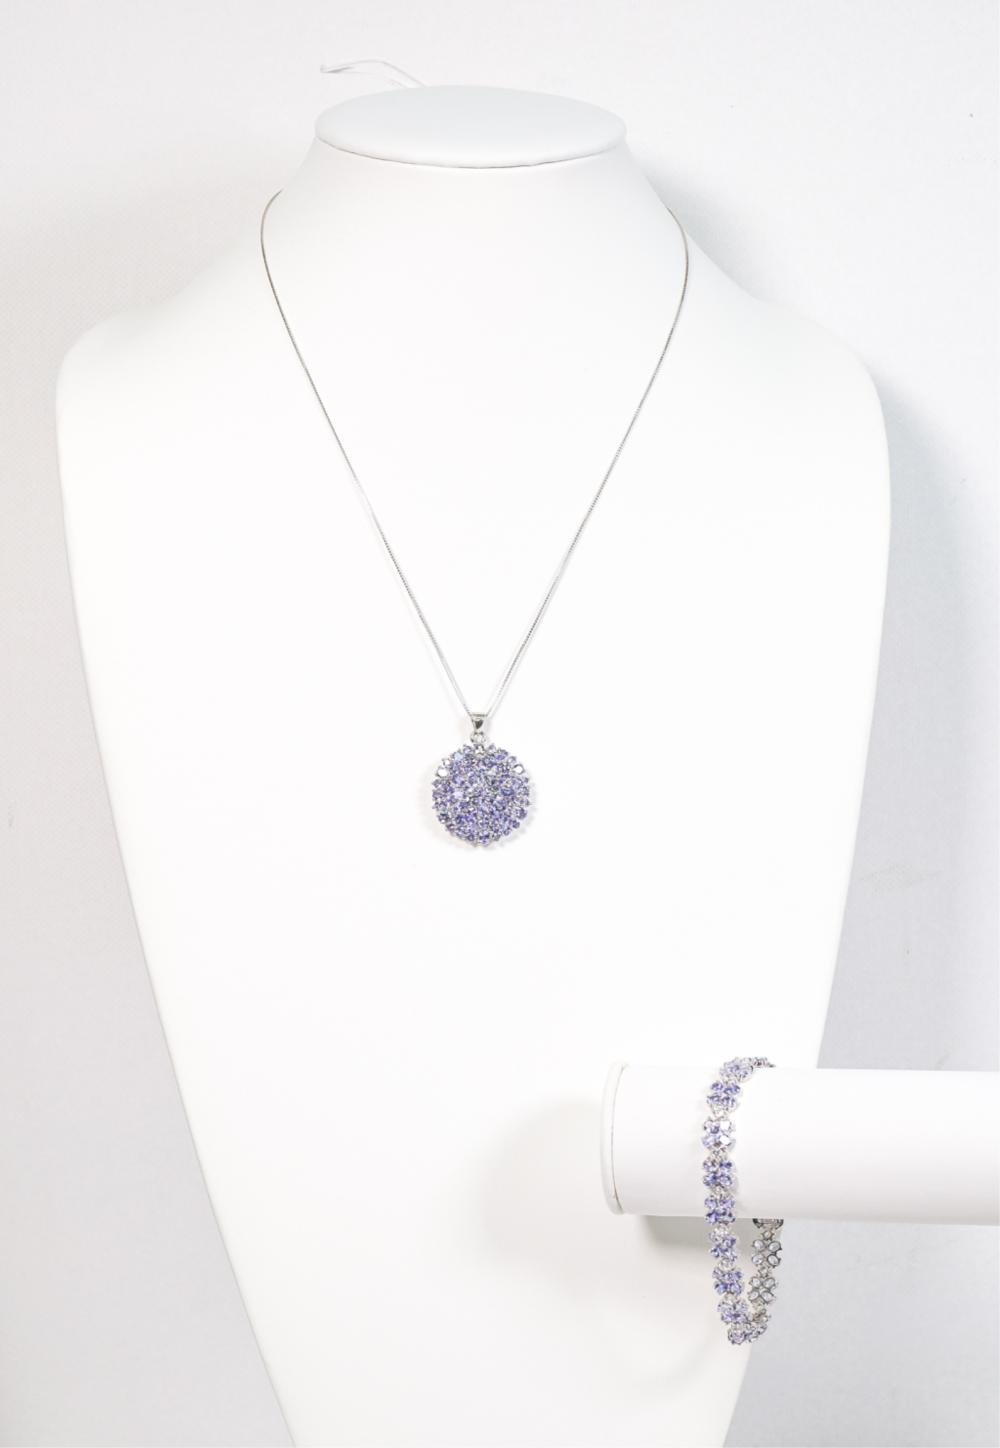 STERLING SILVER IOLITE NECKLACE